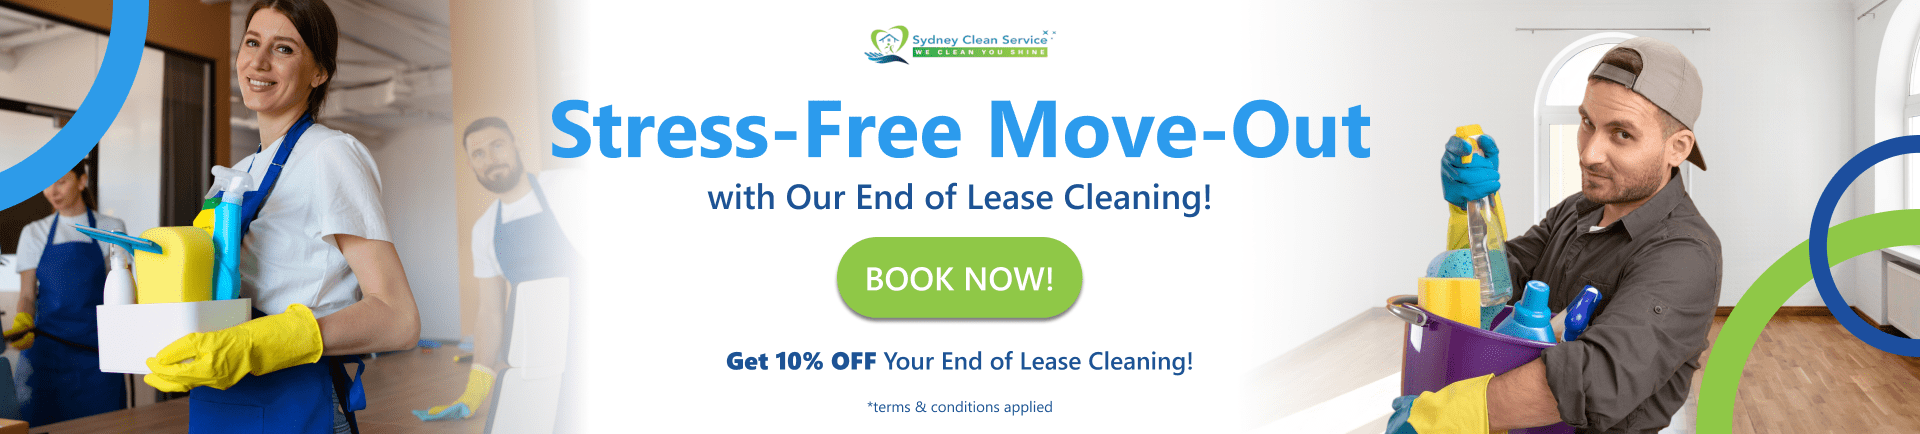 end of lease cleaning service sydney